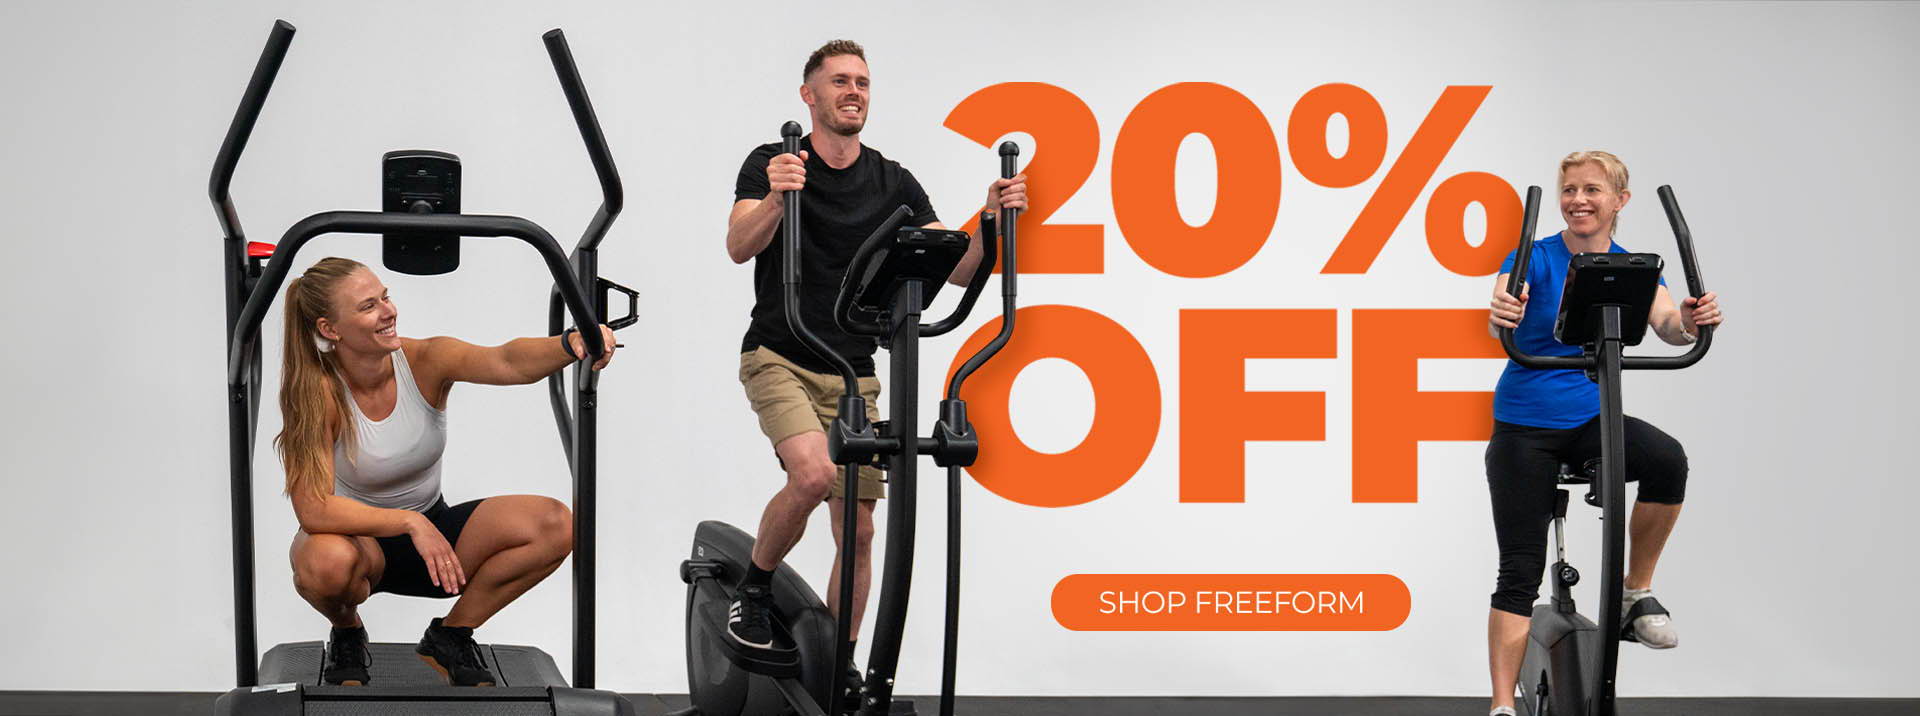 Freeform Cardio Sale - Three people exercising on a Freeform elliptical machine, Freeform manual treadmill and Freeform upright bike, with smiles, against a grey background. Text overlay reads '20% OFF' in large orange letters, with 'SHOP FREEFORM' underneath it.